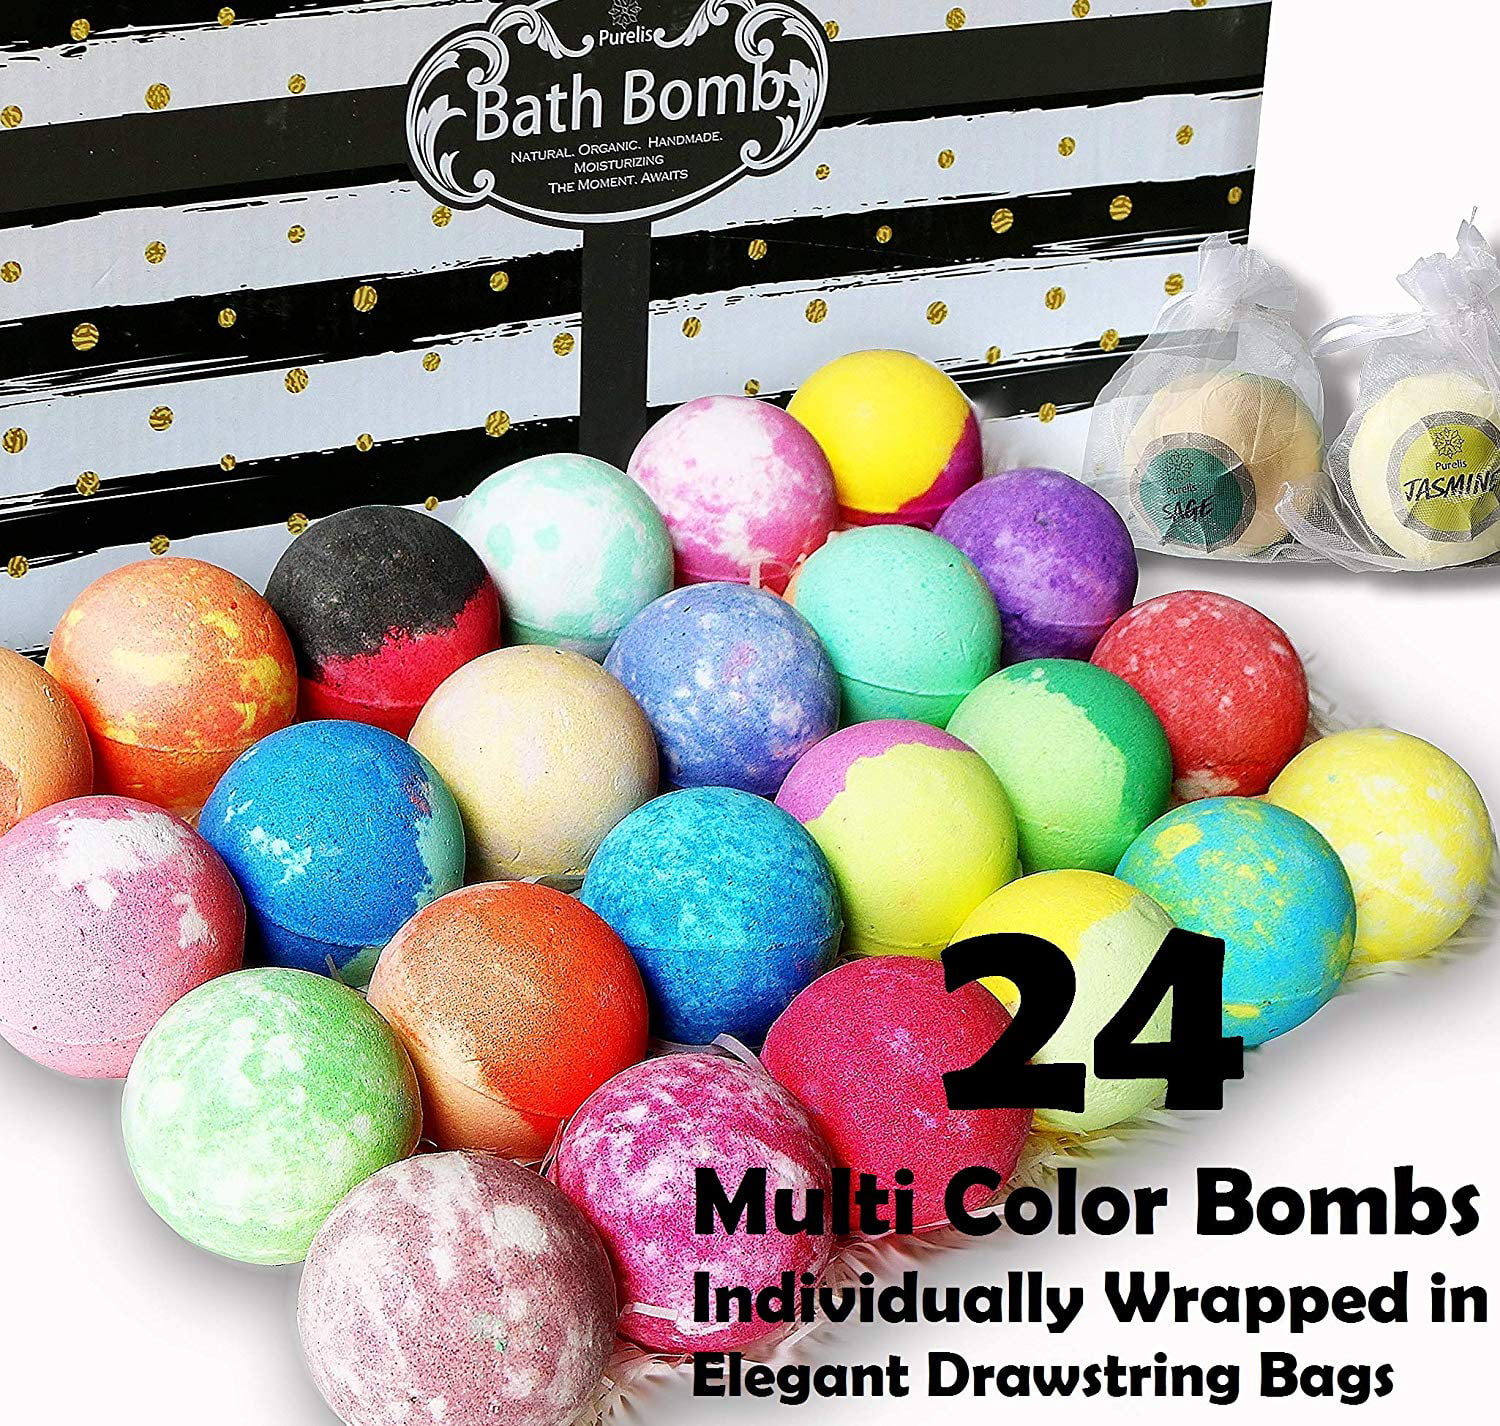 Aromatherapy Bath Bomb Gift Set.24 Individually Wrapped Bath Bombs in